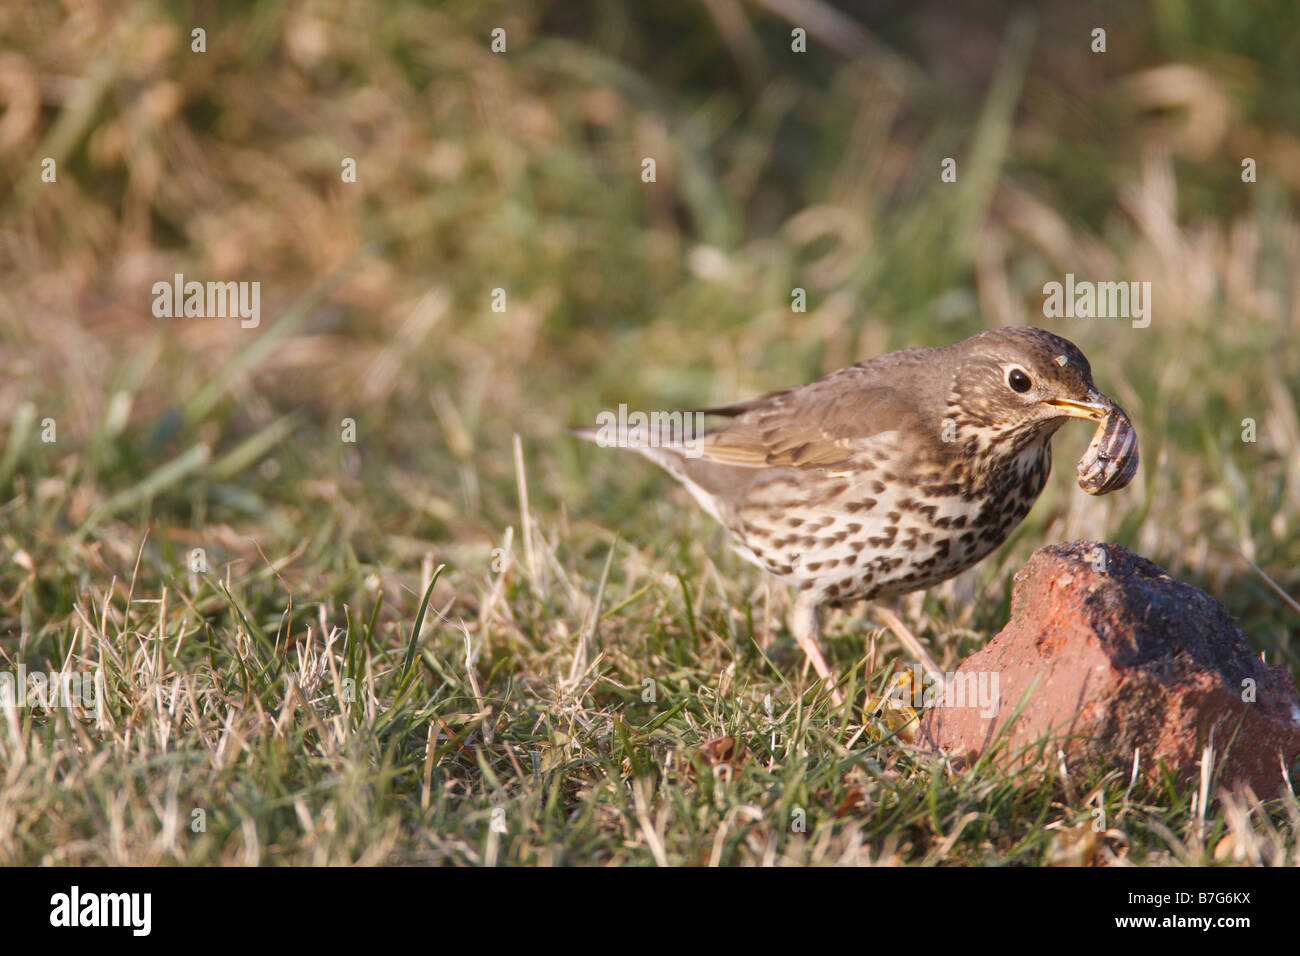 SONG THRUSH Turdus philomelos STANDING NEAR BRICK ANVIL WITH SNAIL Stock Photo